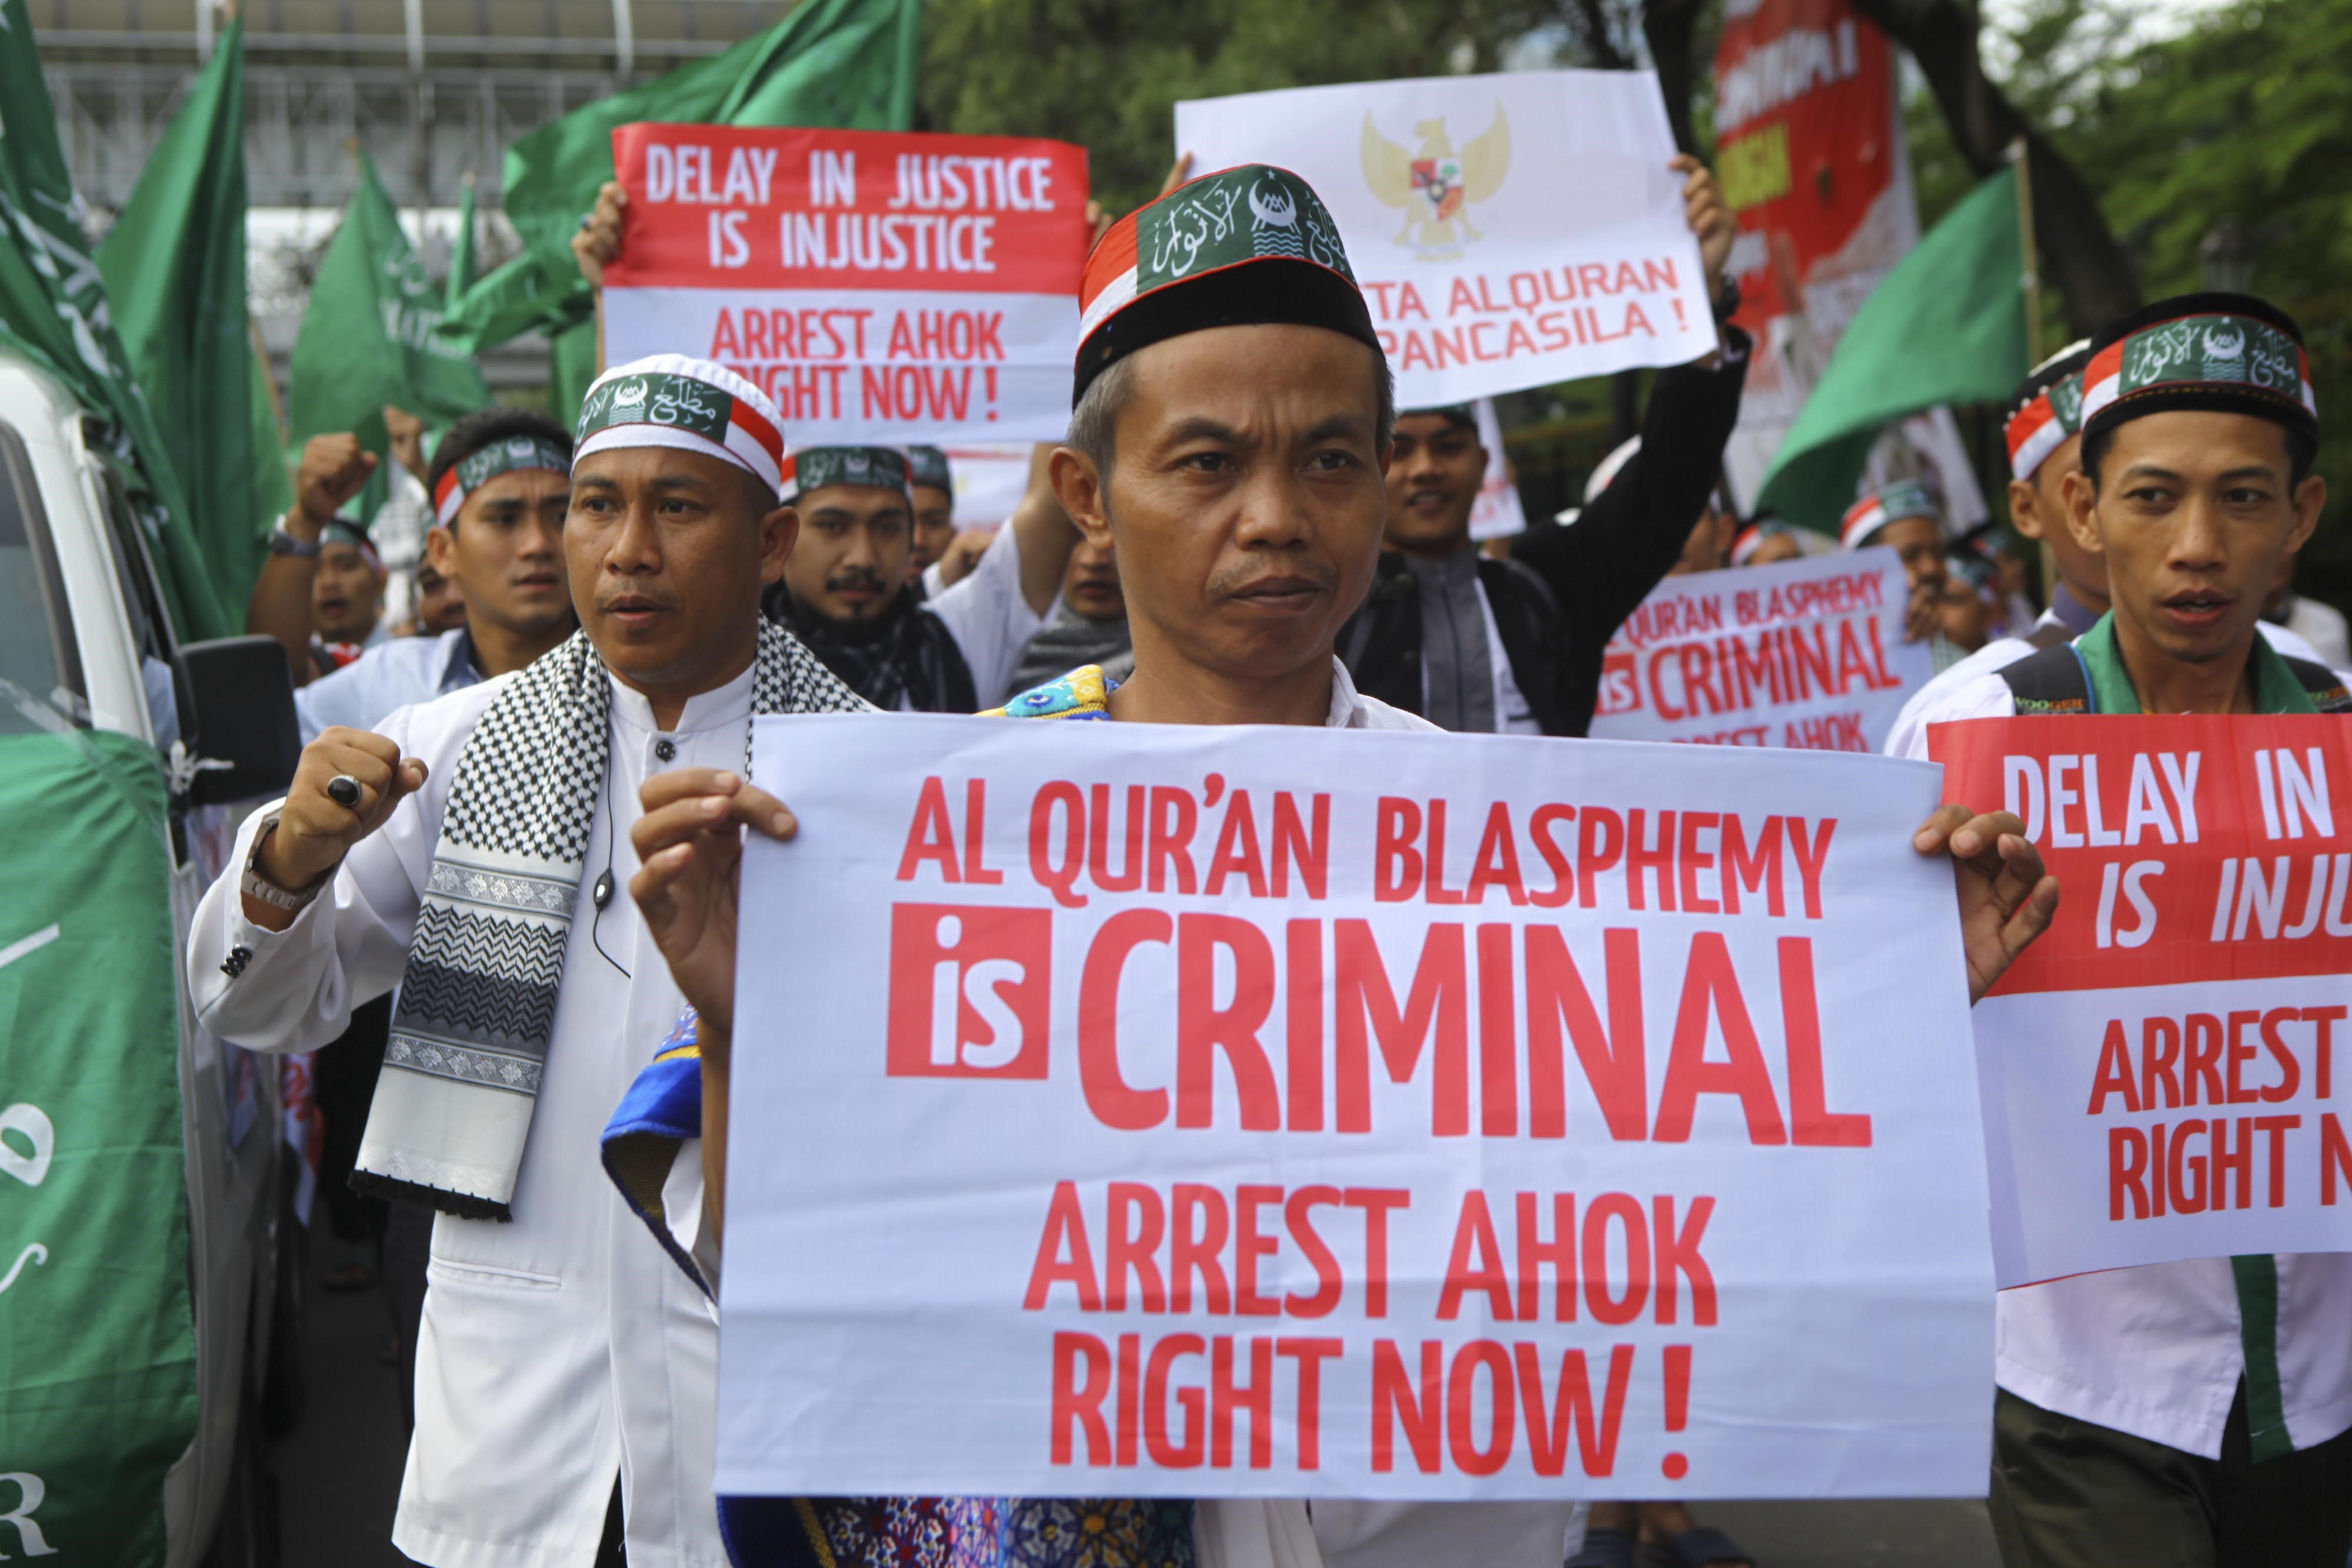 Hundreds of thousands of Indonesian Muslims hold a peaceful protest against the Jakarta Governor who is accused of insulting Islam, in Jakarta, Indonesia on December 02, 2016. The protesters demand the acceleration of legal proceedings against Governor Basuki Ahok Tjahaja Purnama. (Anadolu Agency/Getty Images Ratusan ribu umat Muslim Indonesia di Jakarta pada tanggal 2 Desember 2016 ikut demo damai memprotes Gubernur Jakarta Basuki "Ahok" Tjahaja Purnama yang dituduh menista agama Islam)